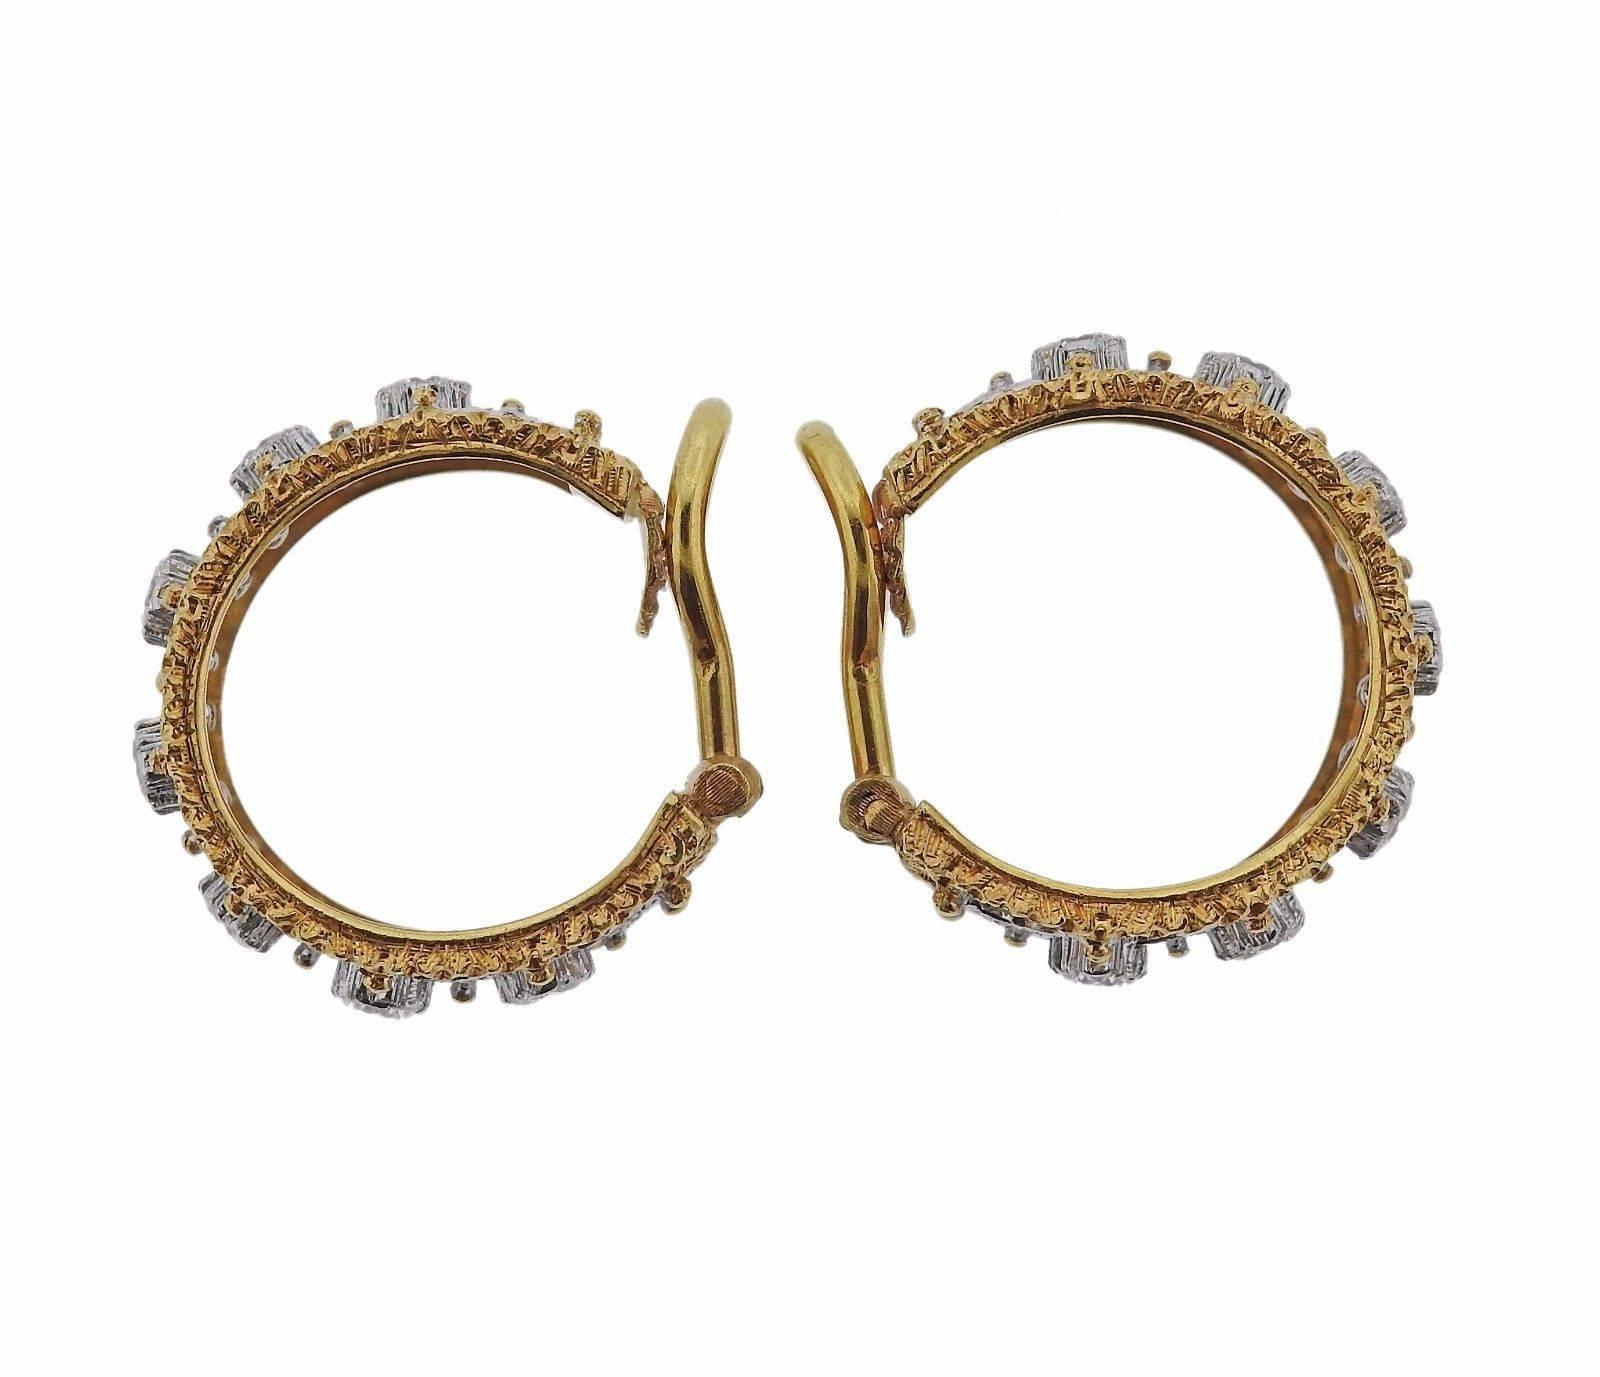 A pair of 18k gold hoop earrings set with 1.28ctw of GH/VS diamonds.  The earrings measure 21mm x 9mm and weigh 10.8 grams.  Marked: Buccellati,Italy, 18k,D2293.  The current retail is $26,700.